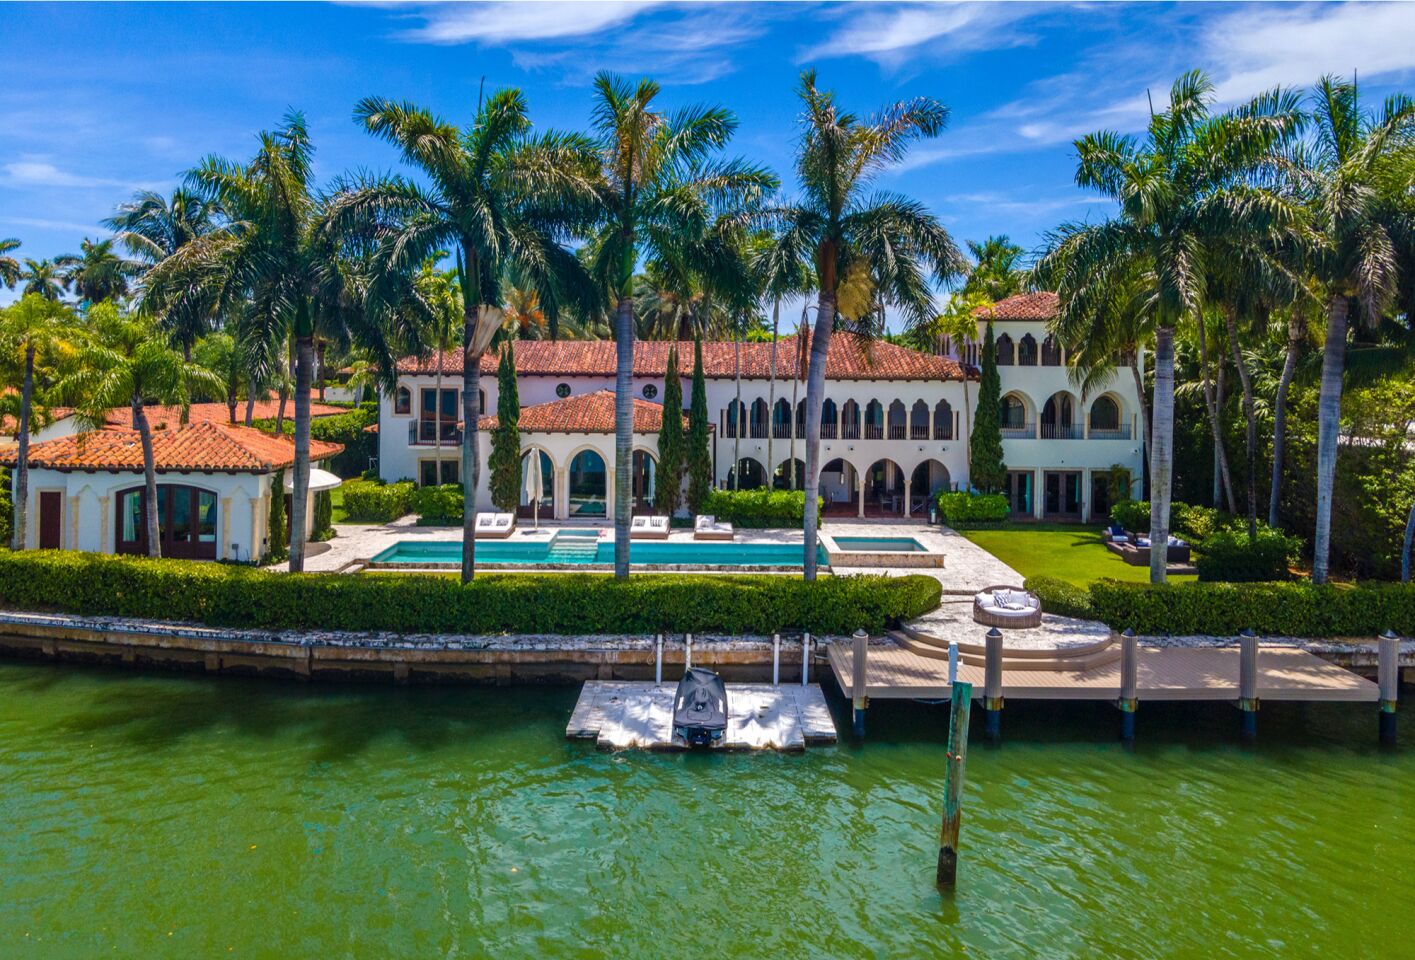 Cher's former Miami Beach mansion: the three-story mansion